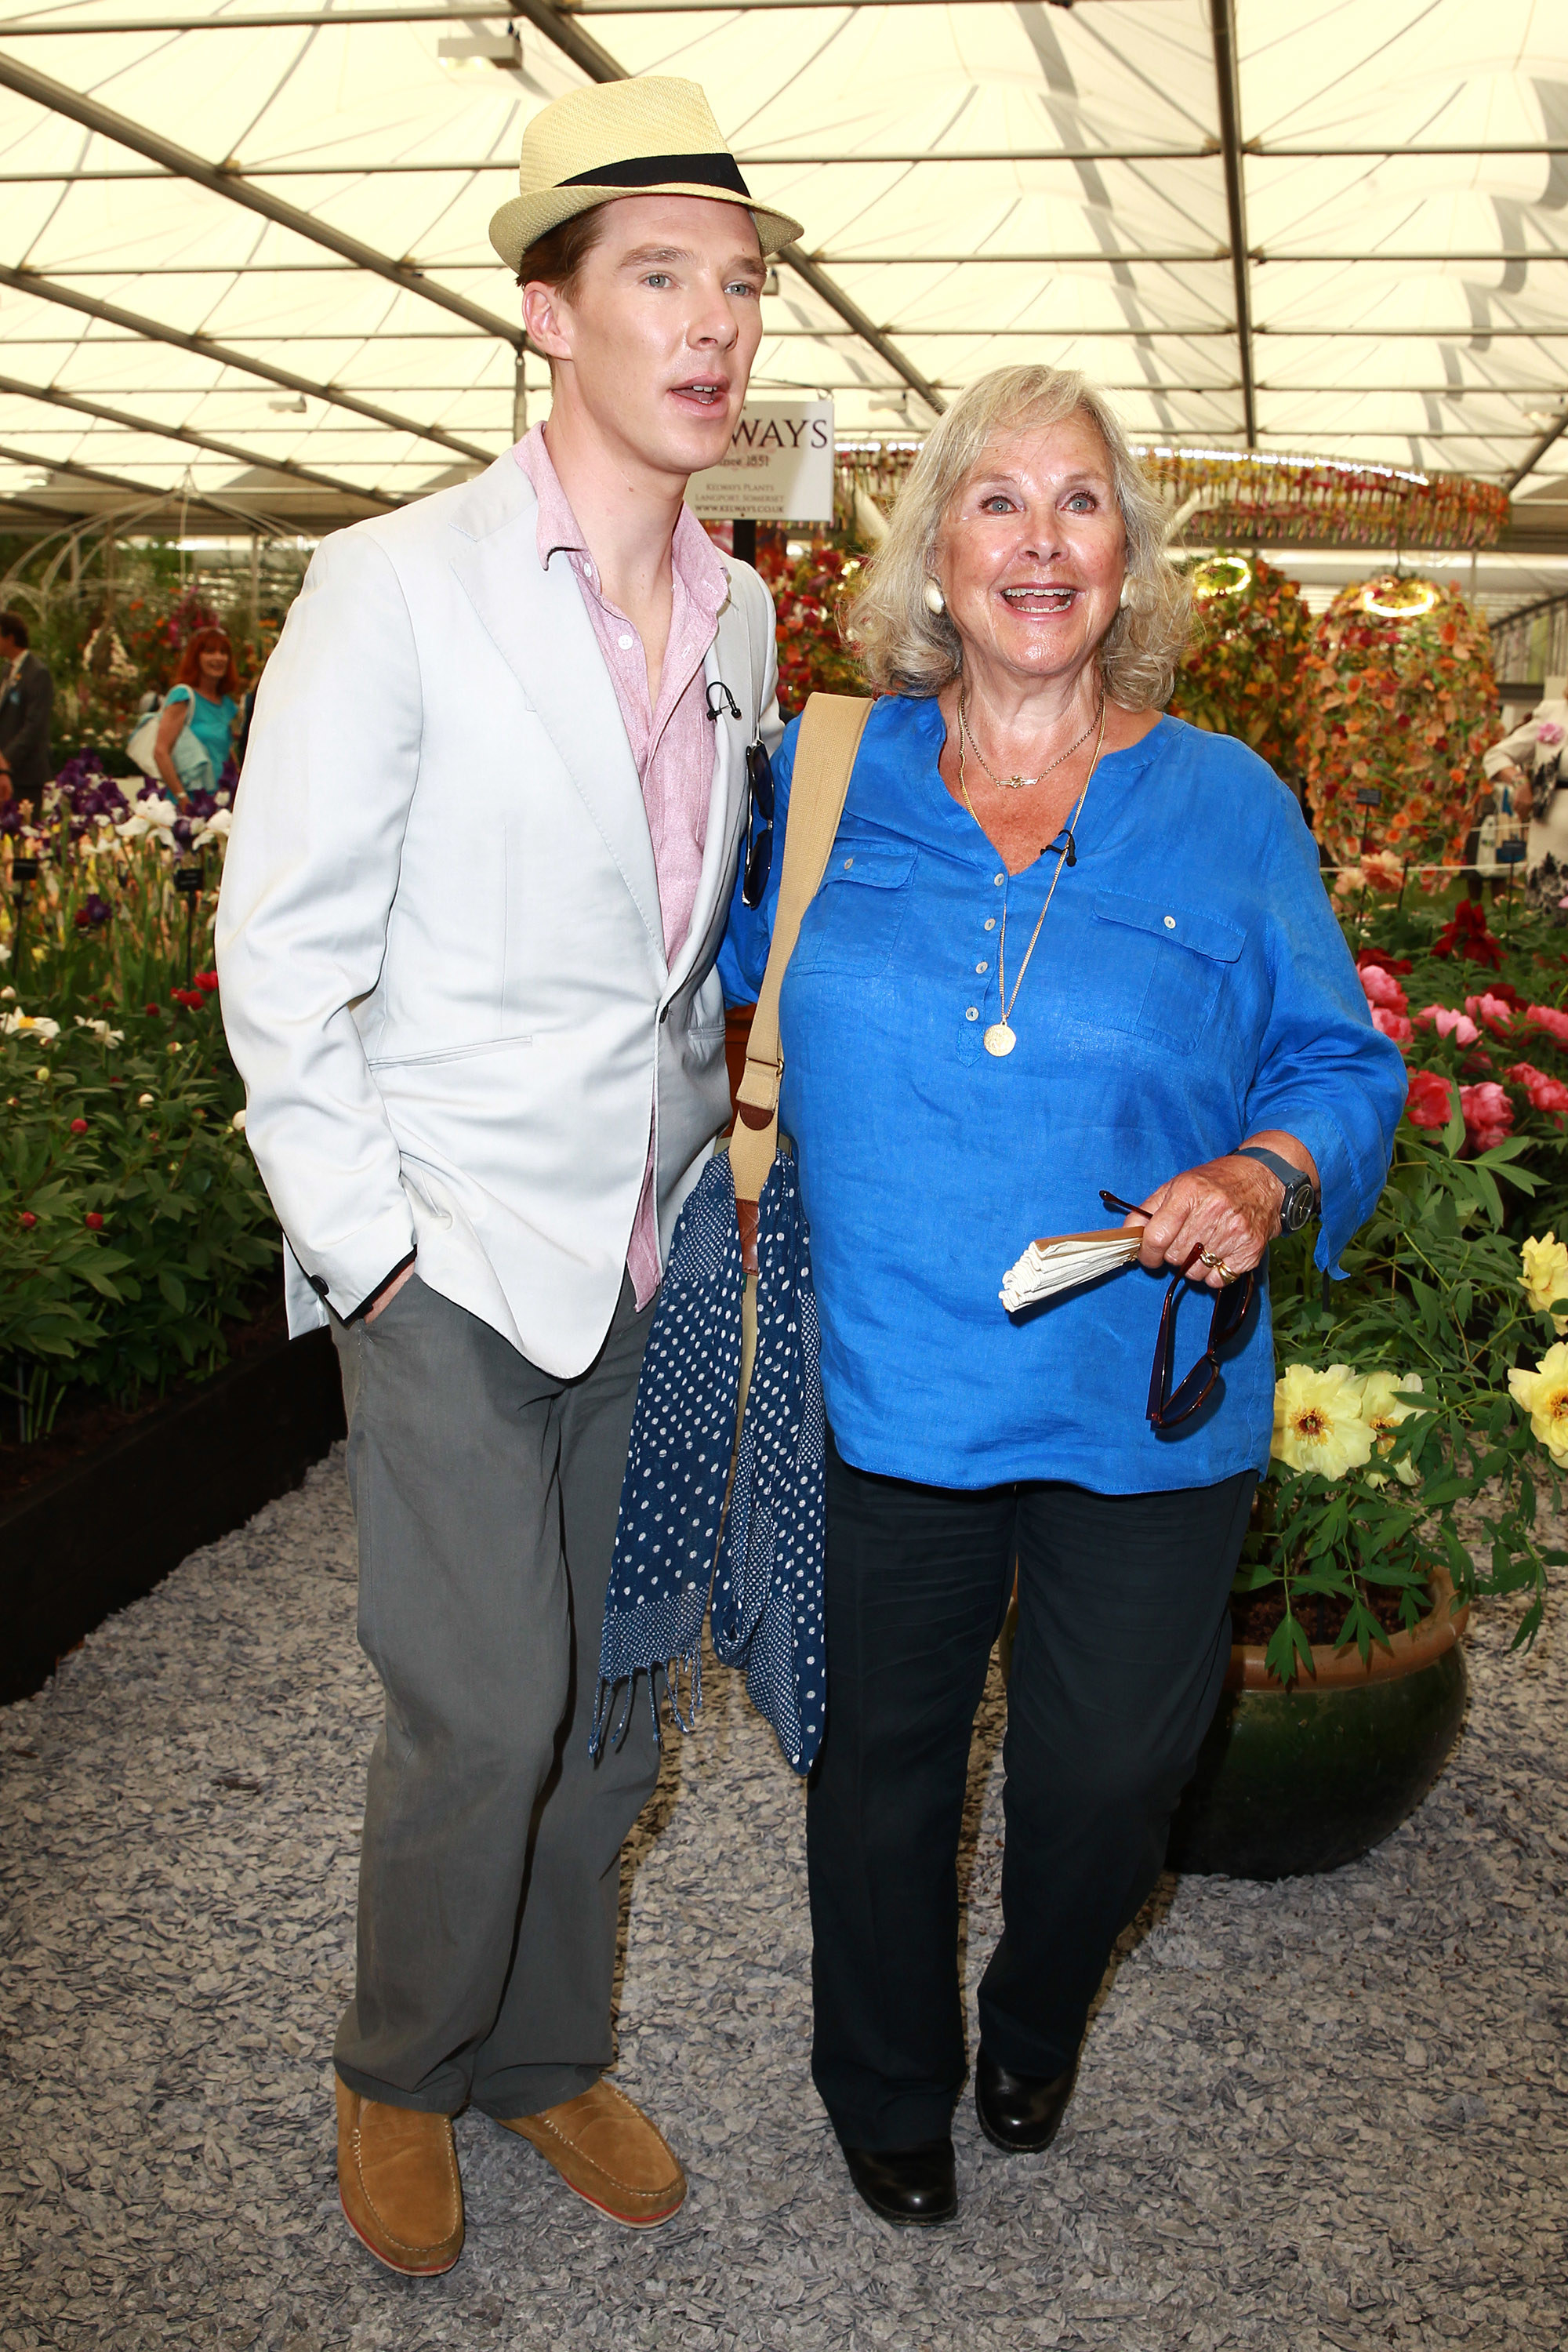 Benedict Cumberbatch and mother Wanda Ventham are photographed at The Chelsea Flower Show preview on May 19, 2014